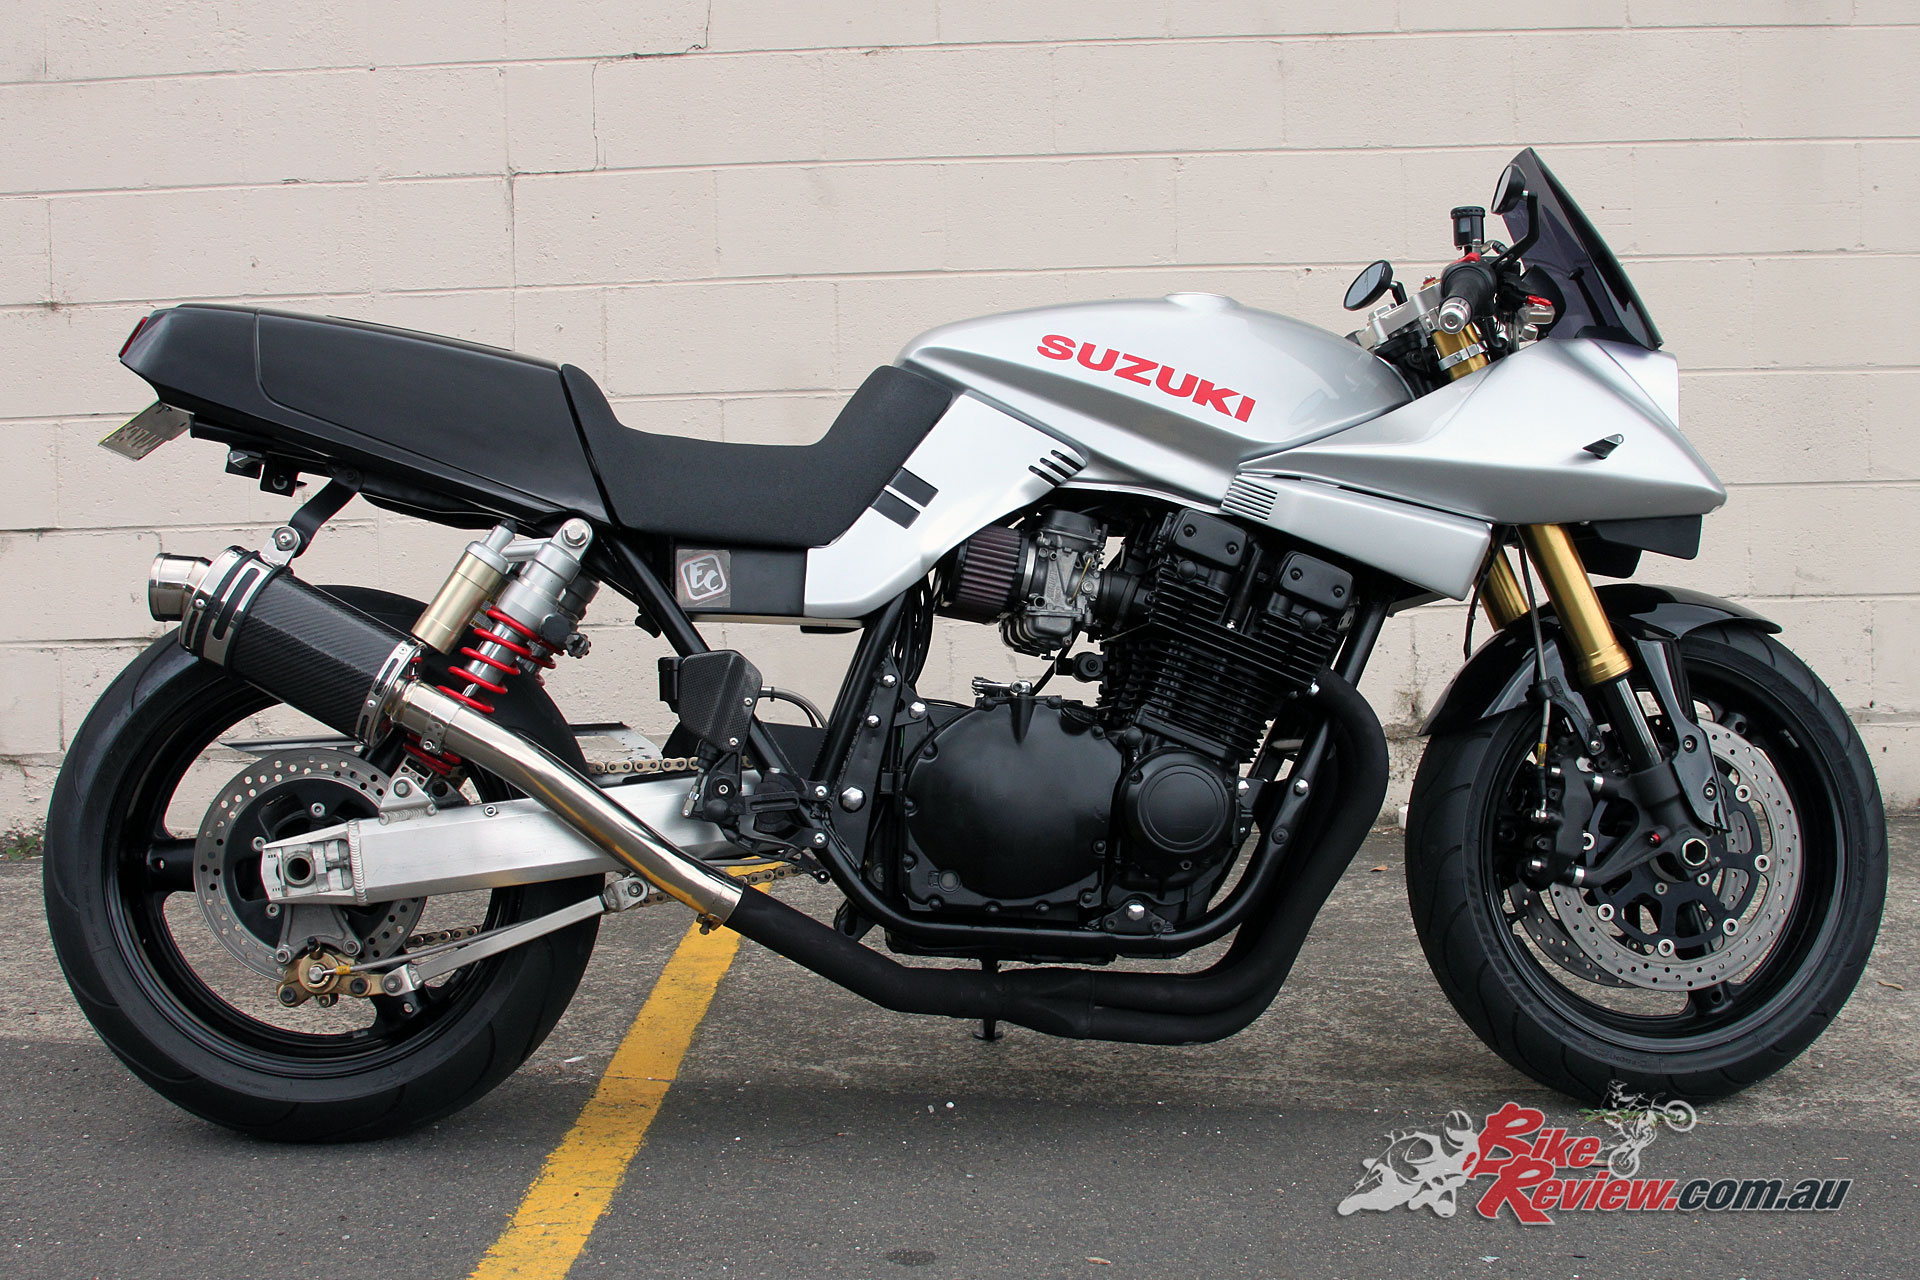 The Suzuki Katana features unique styling, with this custom creation adding modern handling